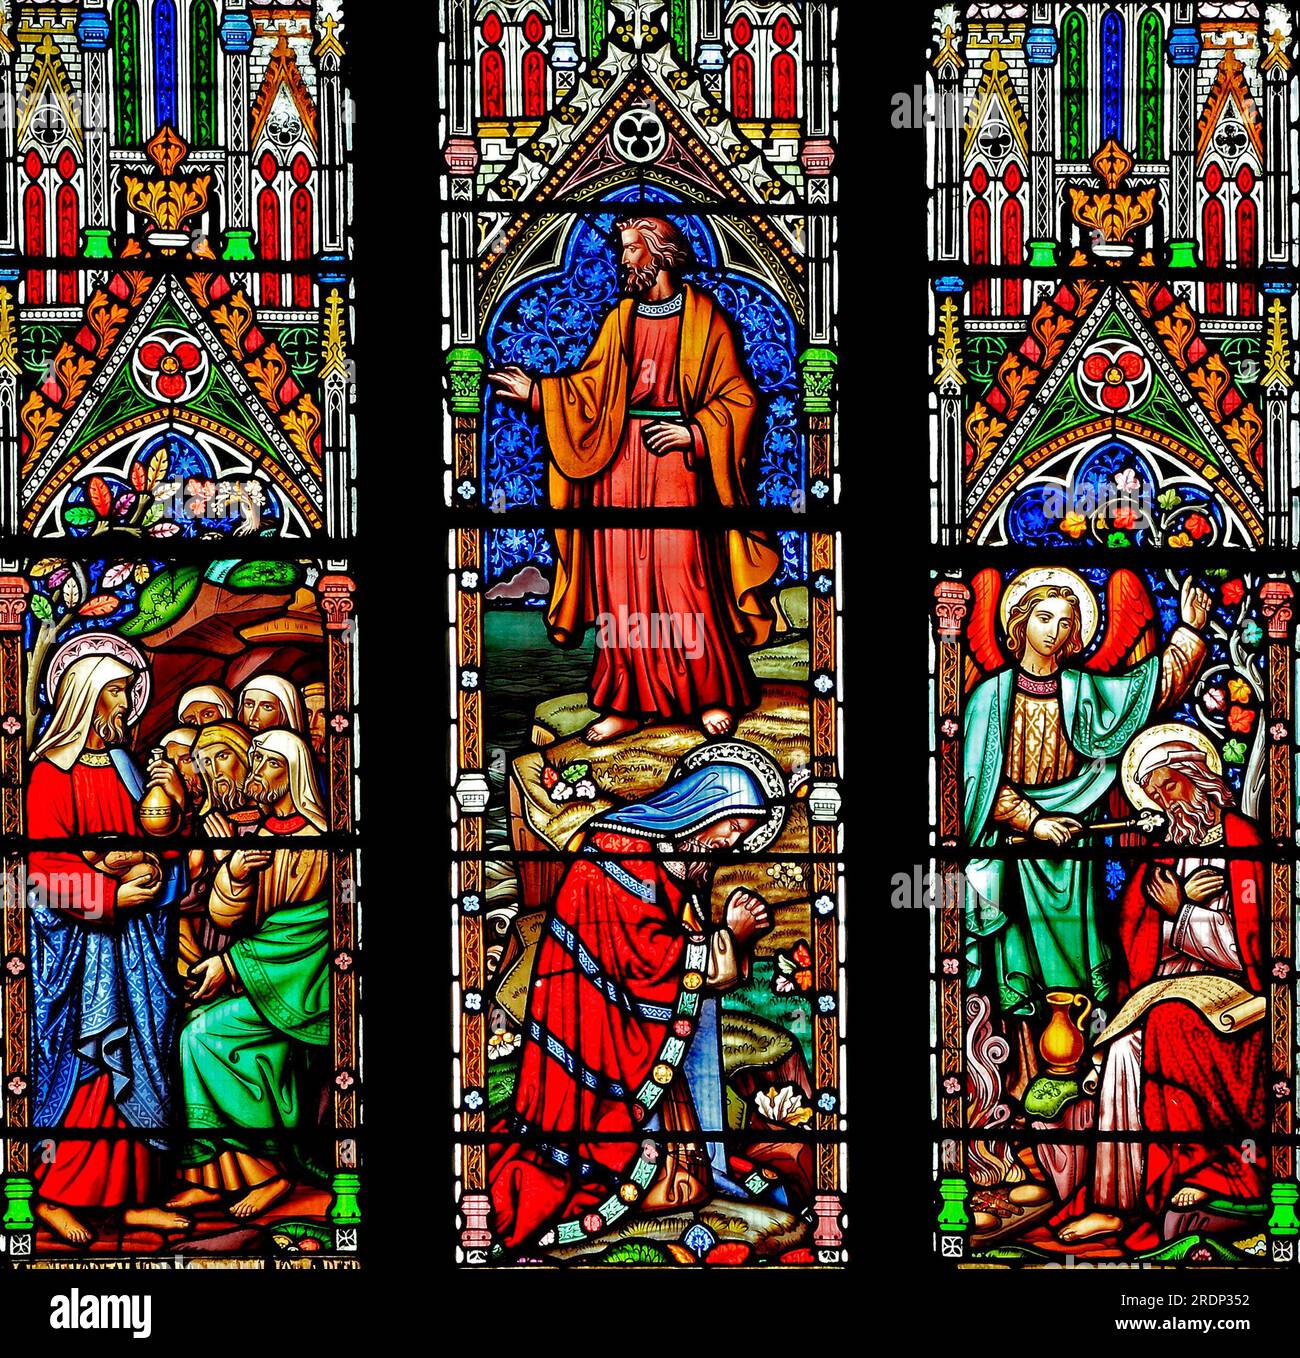 Stained glass window, Obadiah brings bread, Elijah with servant , and Elijah with angel, by William Wailes, mid 19th century, Ely Cathedral Stock Photo